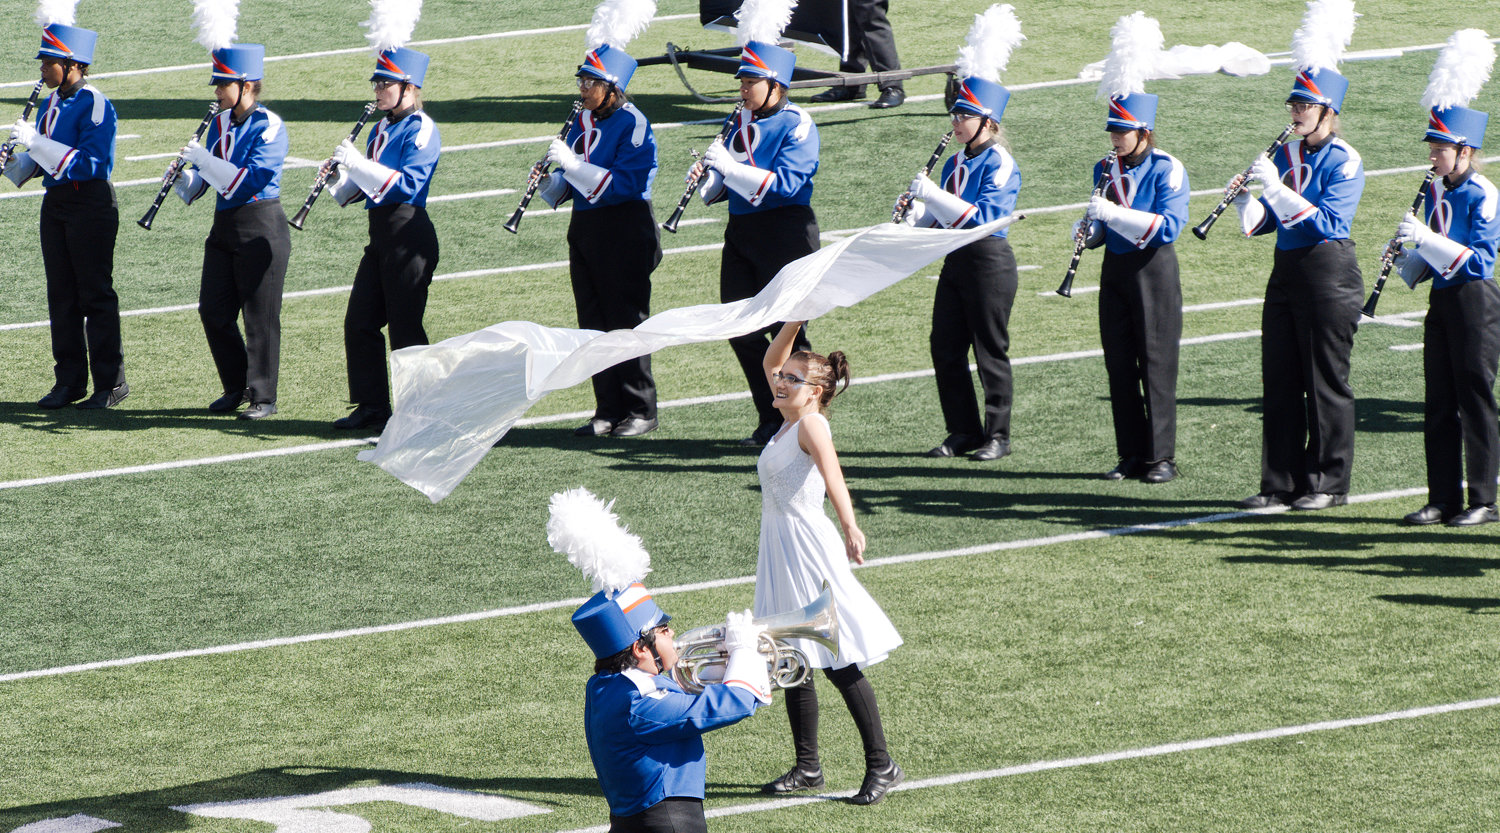 Whitnee Weiher performs a flag solo during Quitman's performance at the UIL Region 4 marching band competition in Texarkana on Tuesday.